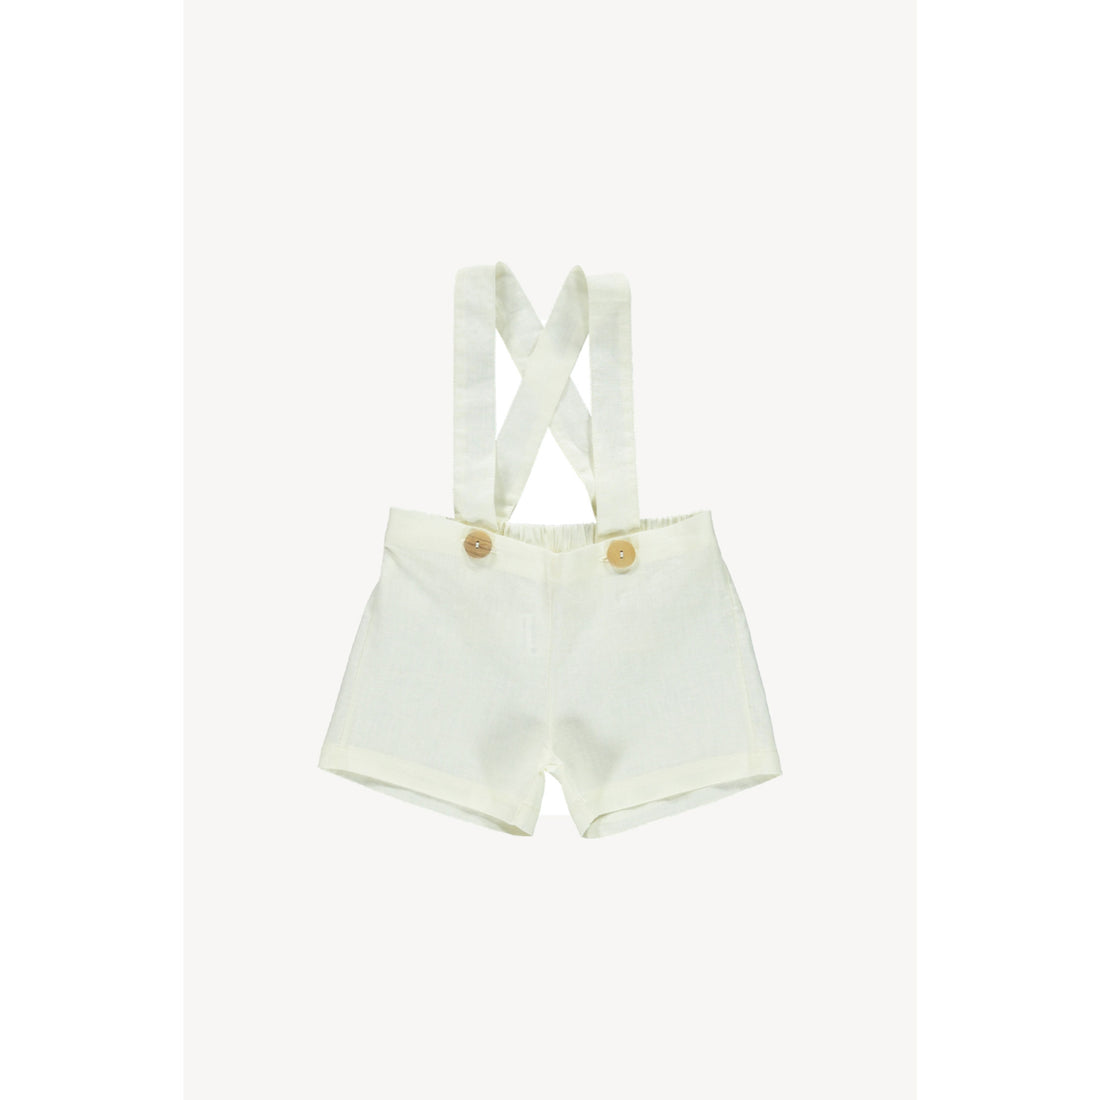 Fin and Vince Natural Suspender Shorts